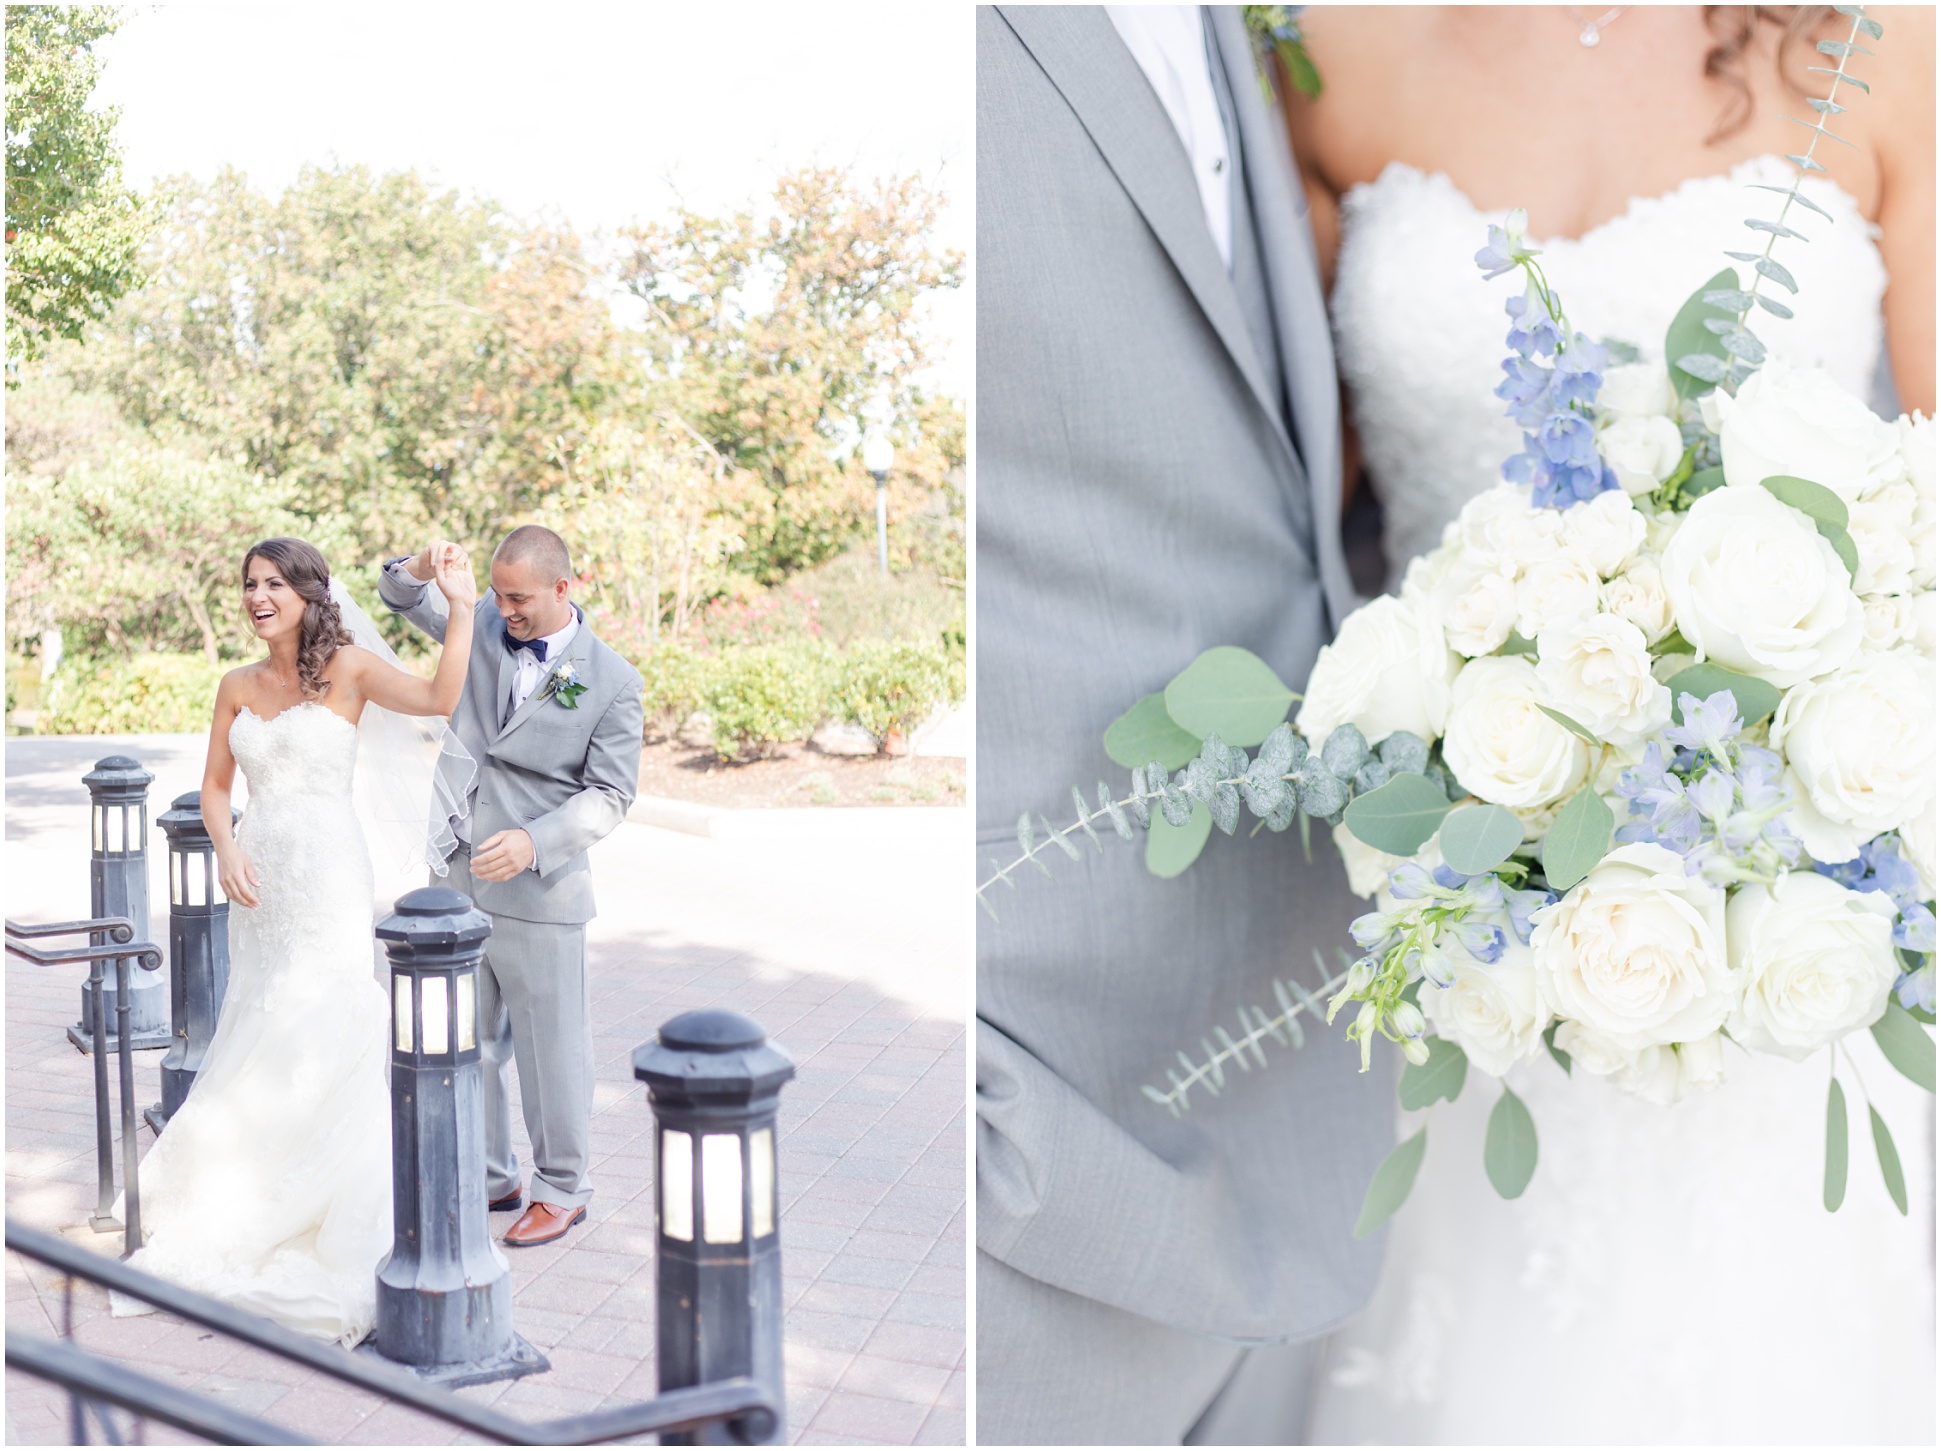 Left: Groom twirling bride during the first look, Right: close up of white, sage green, and blue bridal bouquet